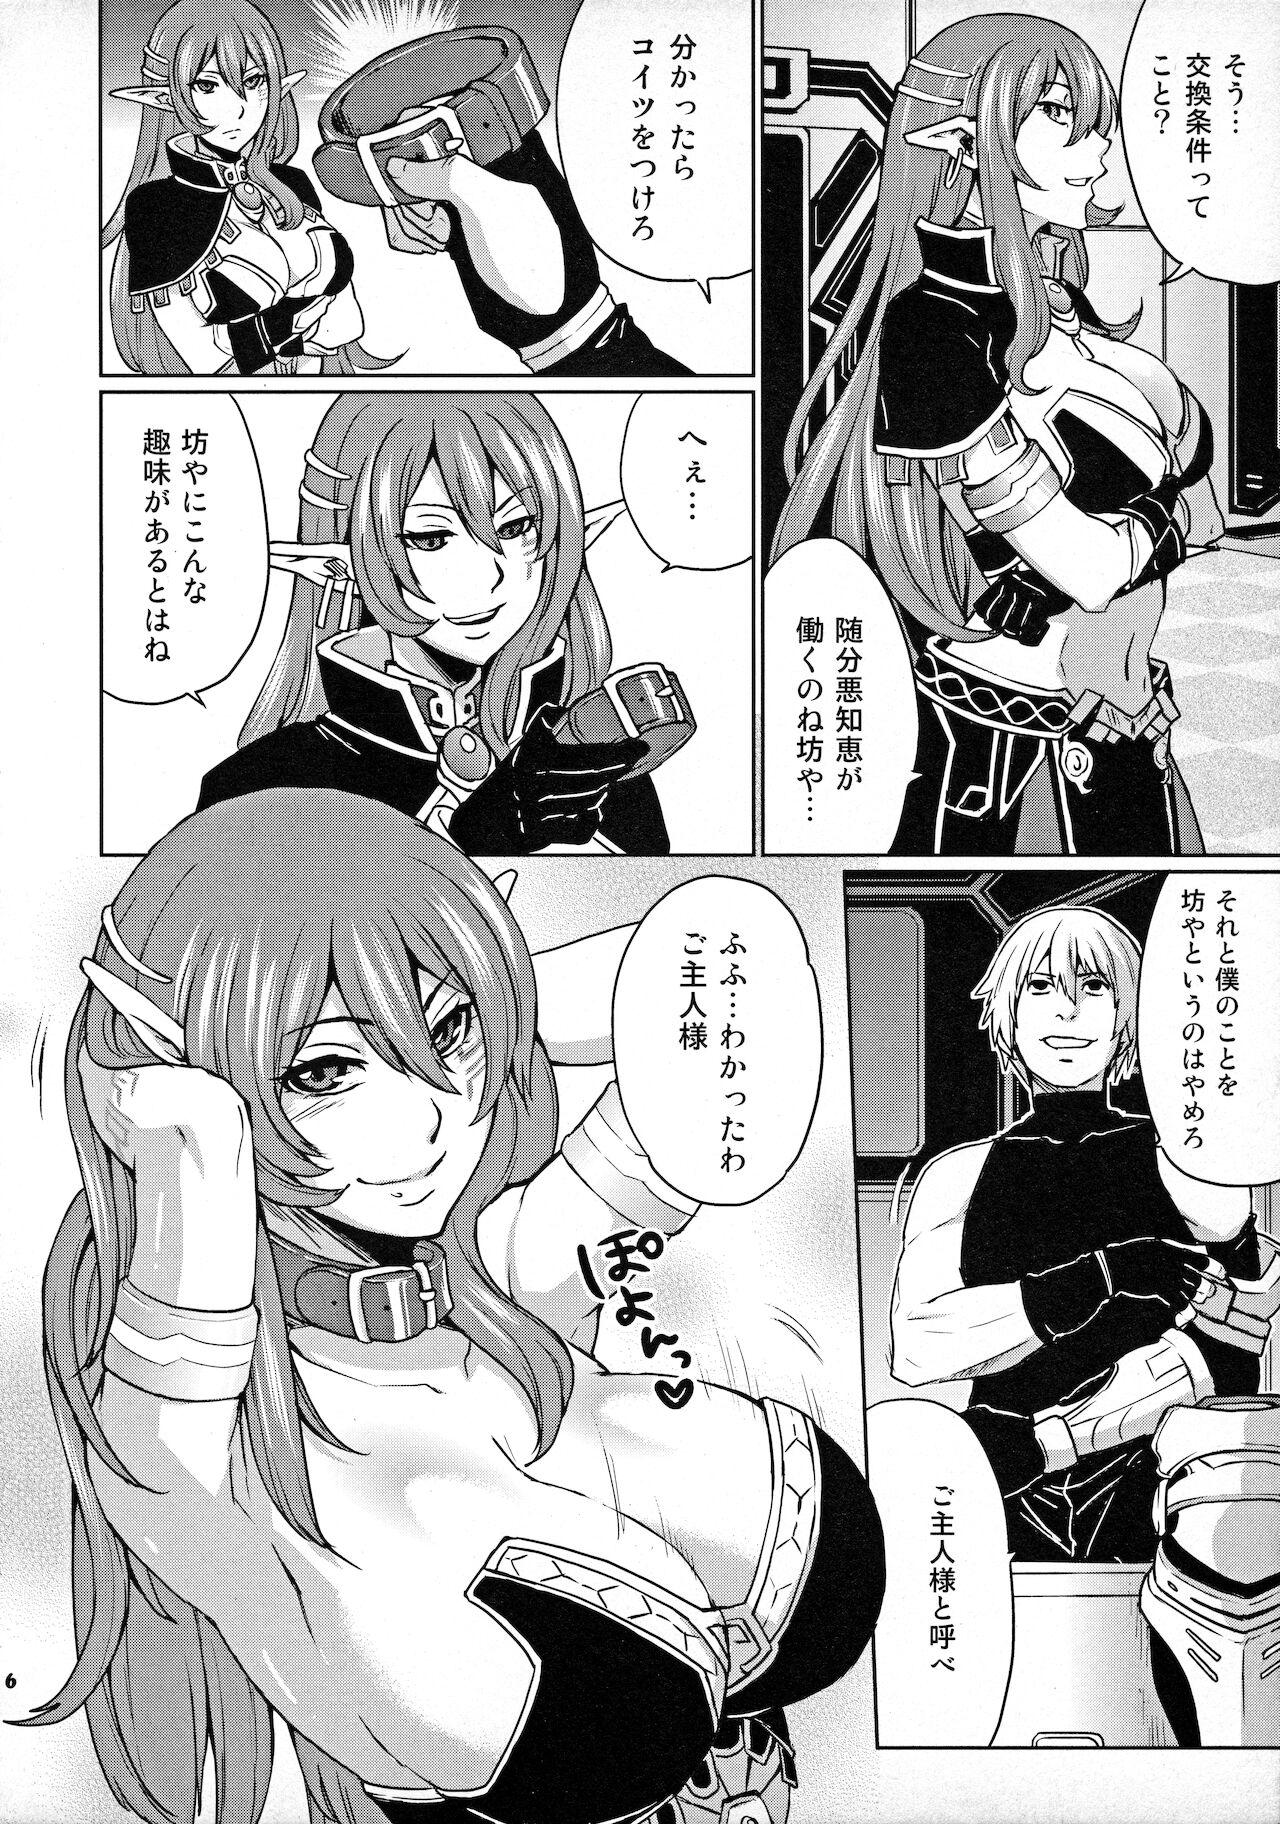 Busty Hoshi no Umi no Miboujin - The Widow of The Star Ocean - Star ocean 4 Pinoy - Page 5